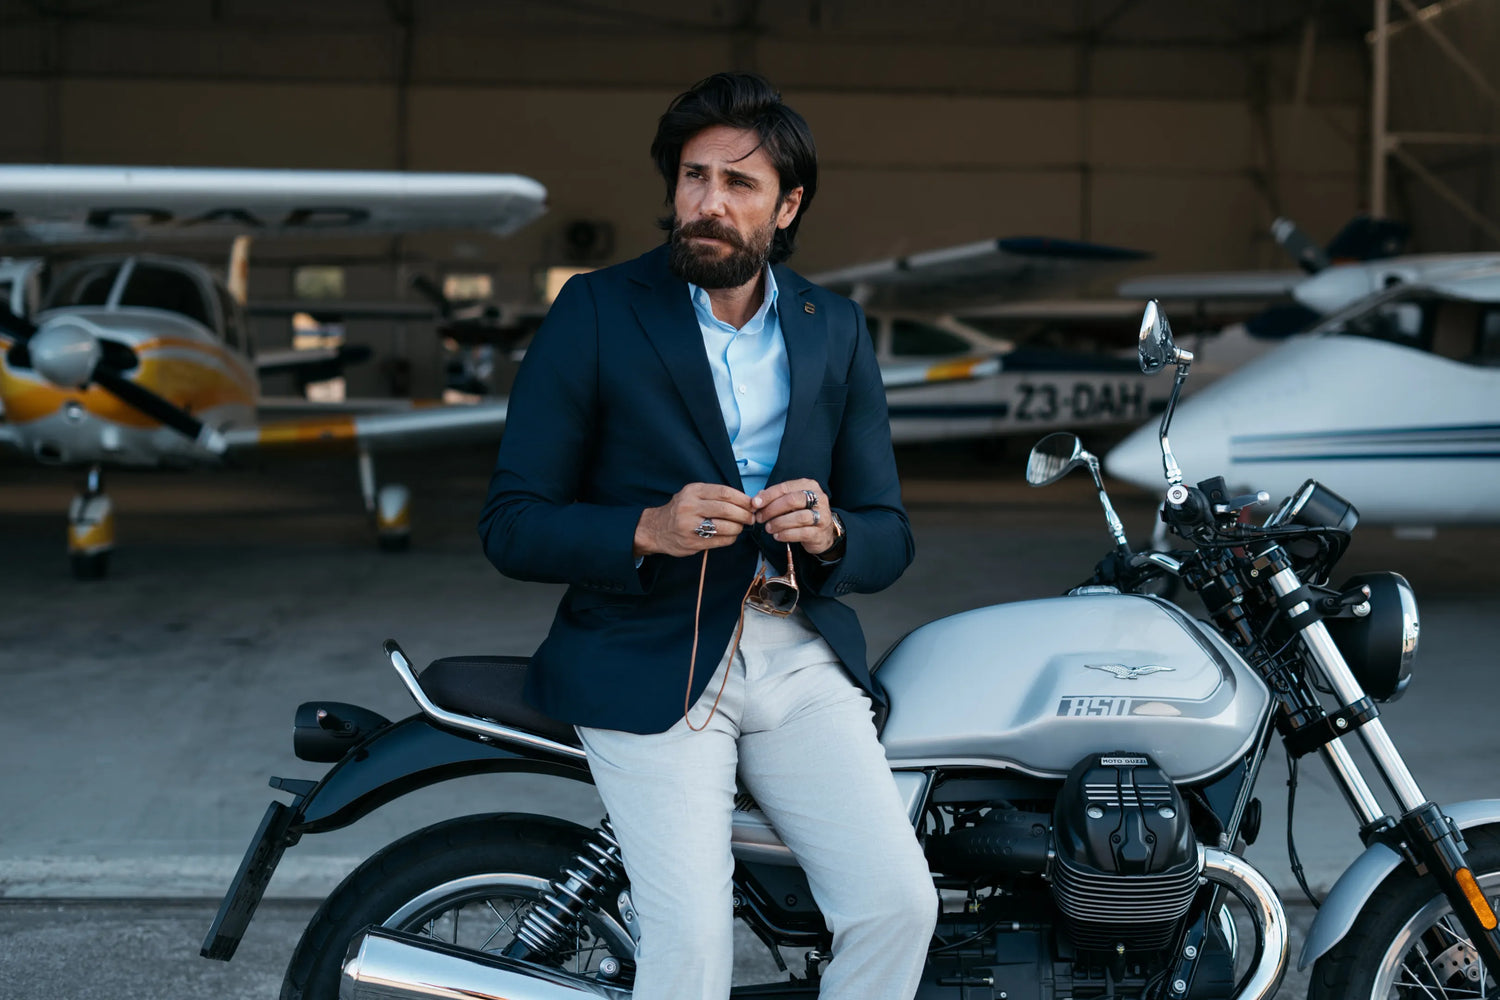 Motorcyclist in a Brummell Blazer on a Motorcycle at a Private Aircraft Hangar